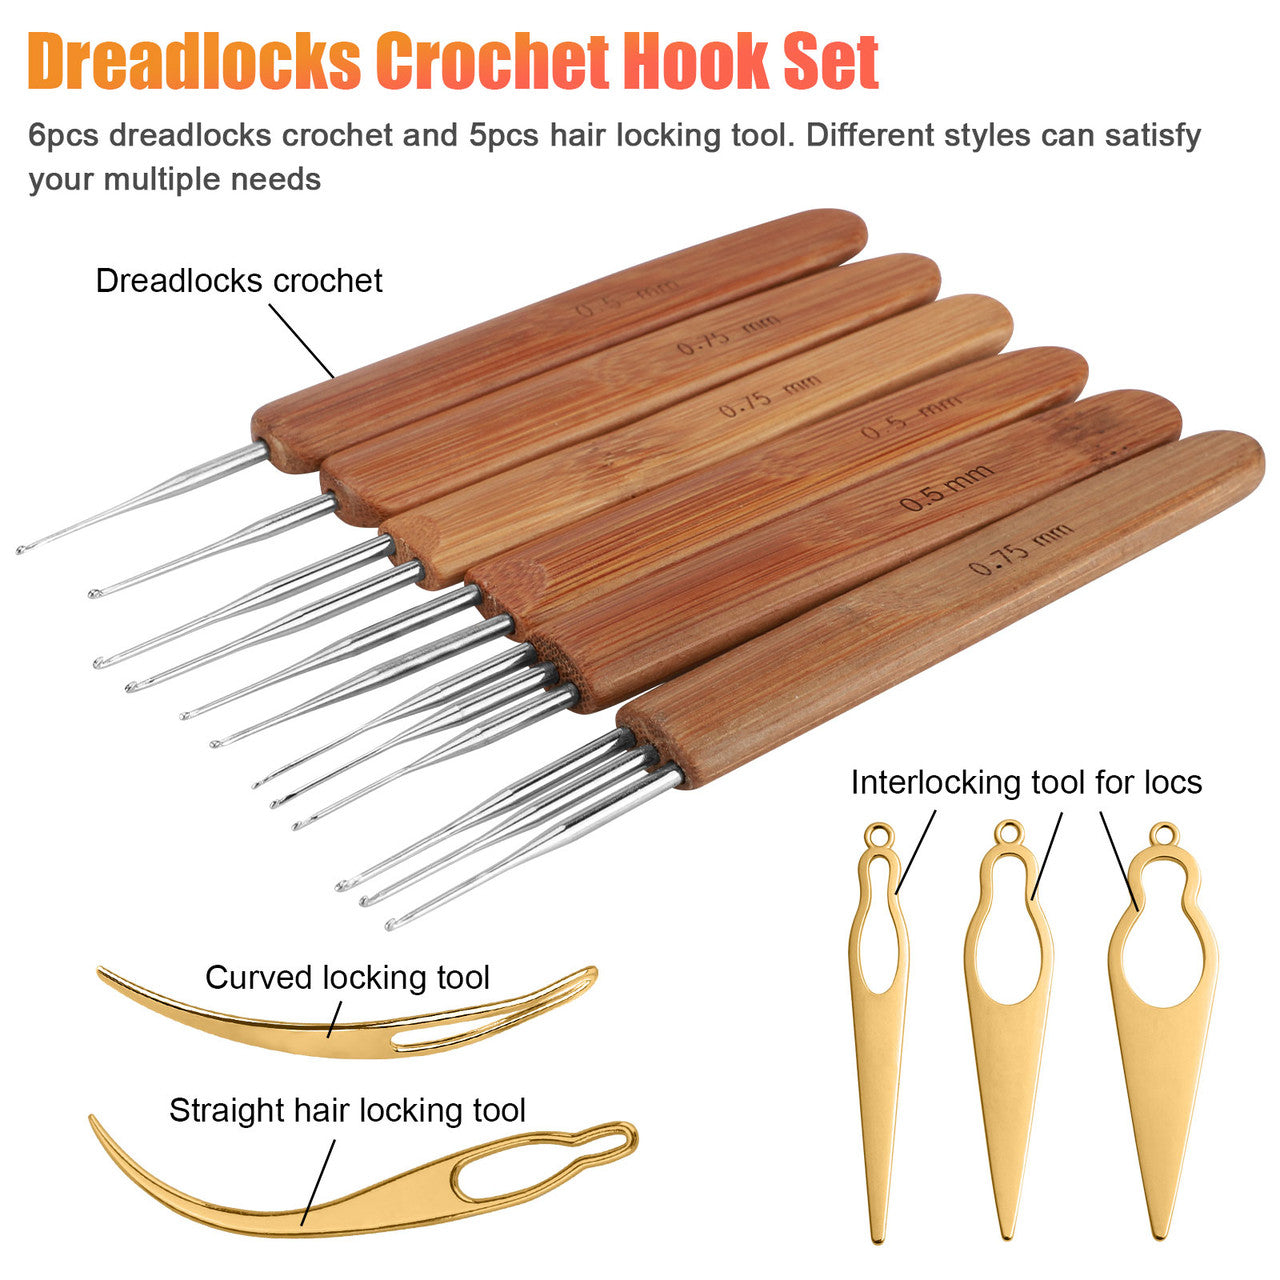 11 Pieces Dreadlock Crochet Hook Set, 6pcs Braid Hair Dreadlock Needle Weaving Crochet with Bamboo Handle and 5pcs Hair Interlocking Tool, Straight and Curved Hair Locking, for Making Braid Craft